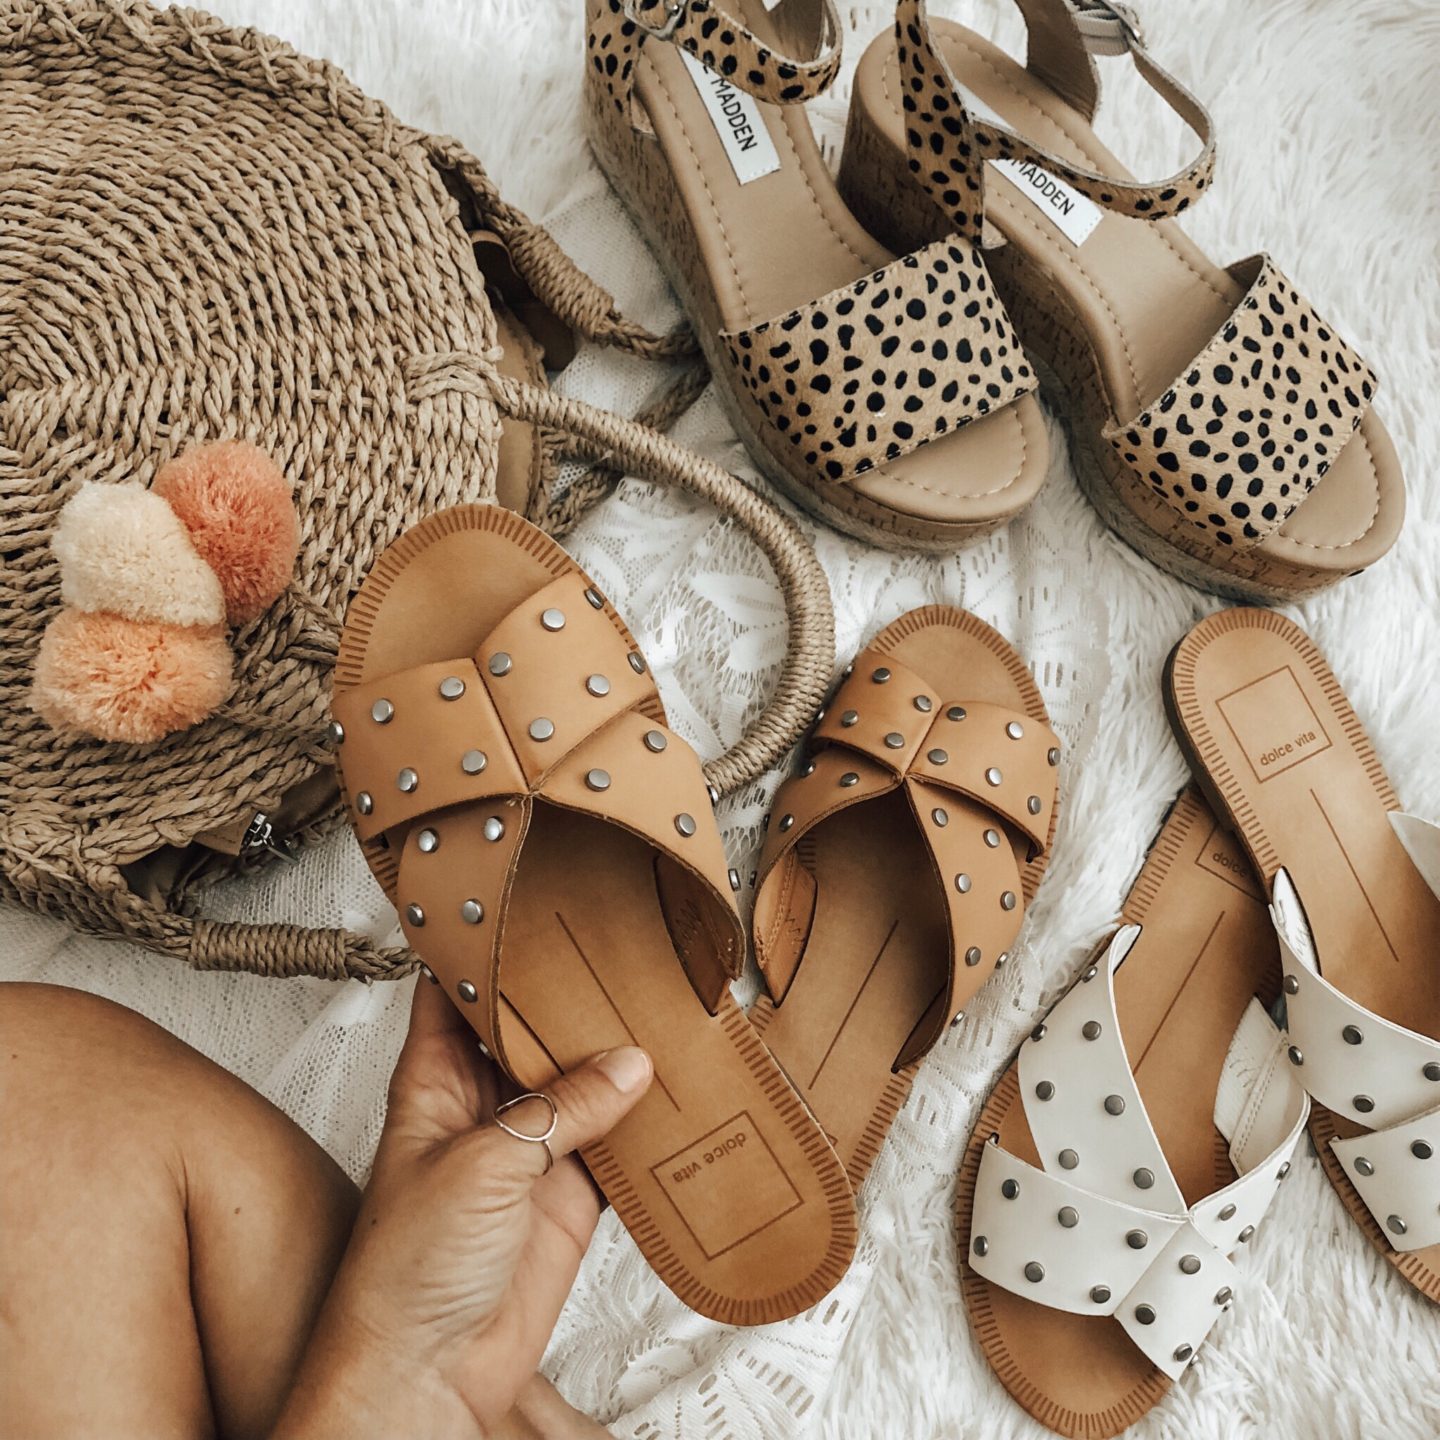 CURRENT SHOE TRENDS- WHAT I'M LOVING THIS SEASON - Jaclyn De Leon Style